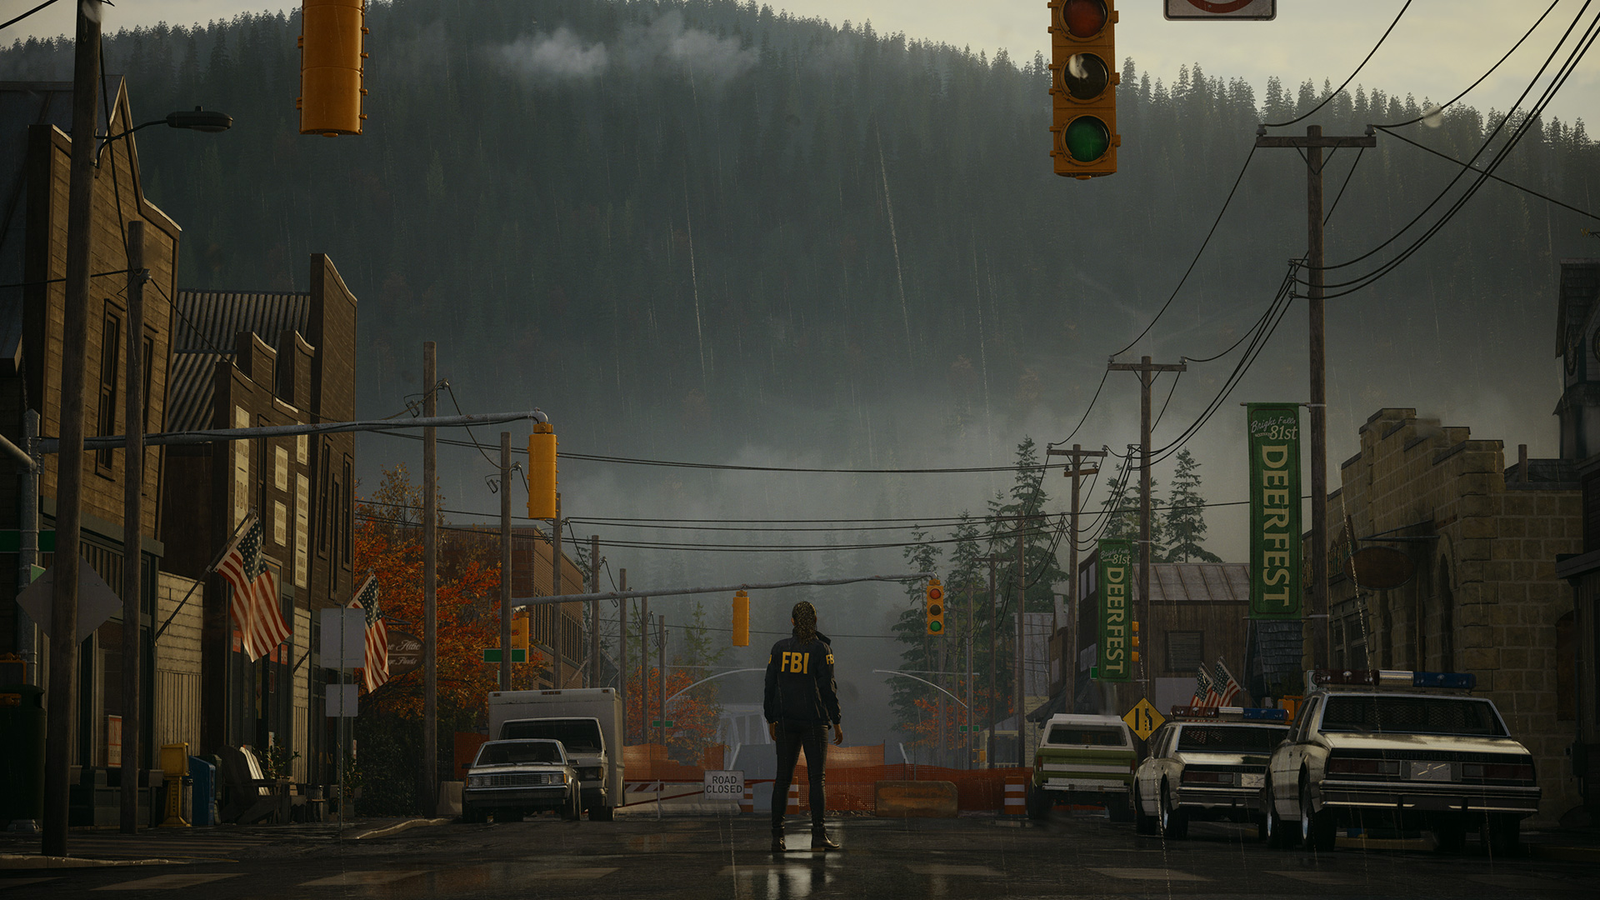 Alan Wake 2 Being Digital-Only Will Hopefully Result In A 'Better' Game,  Says Developer